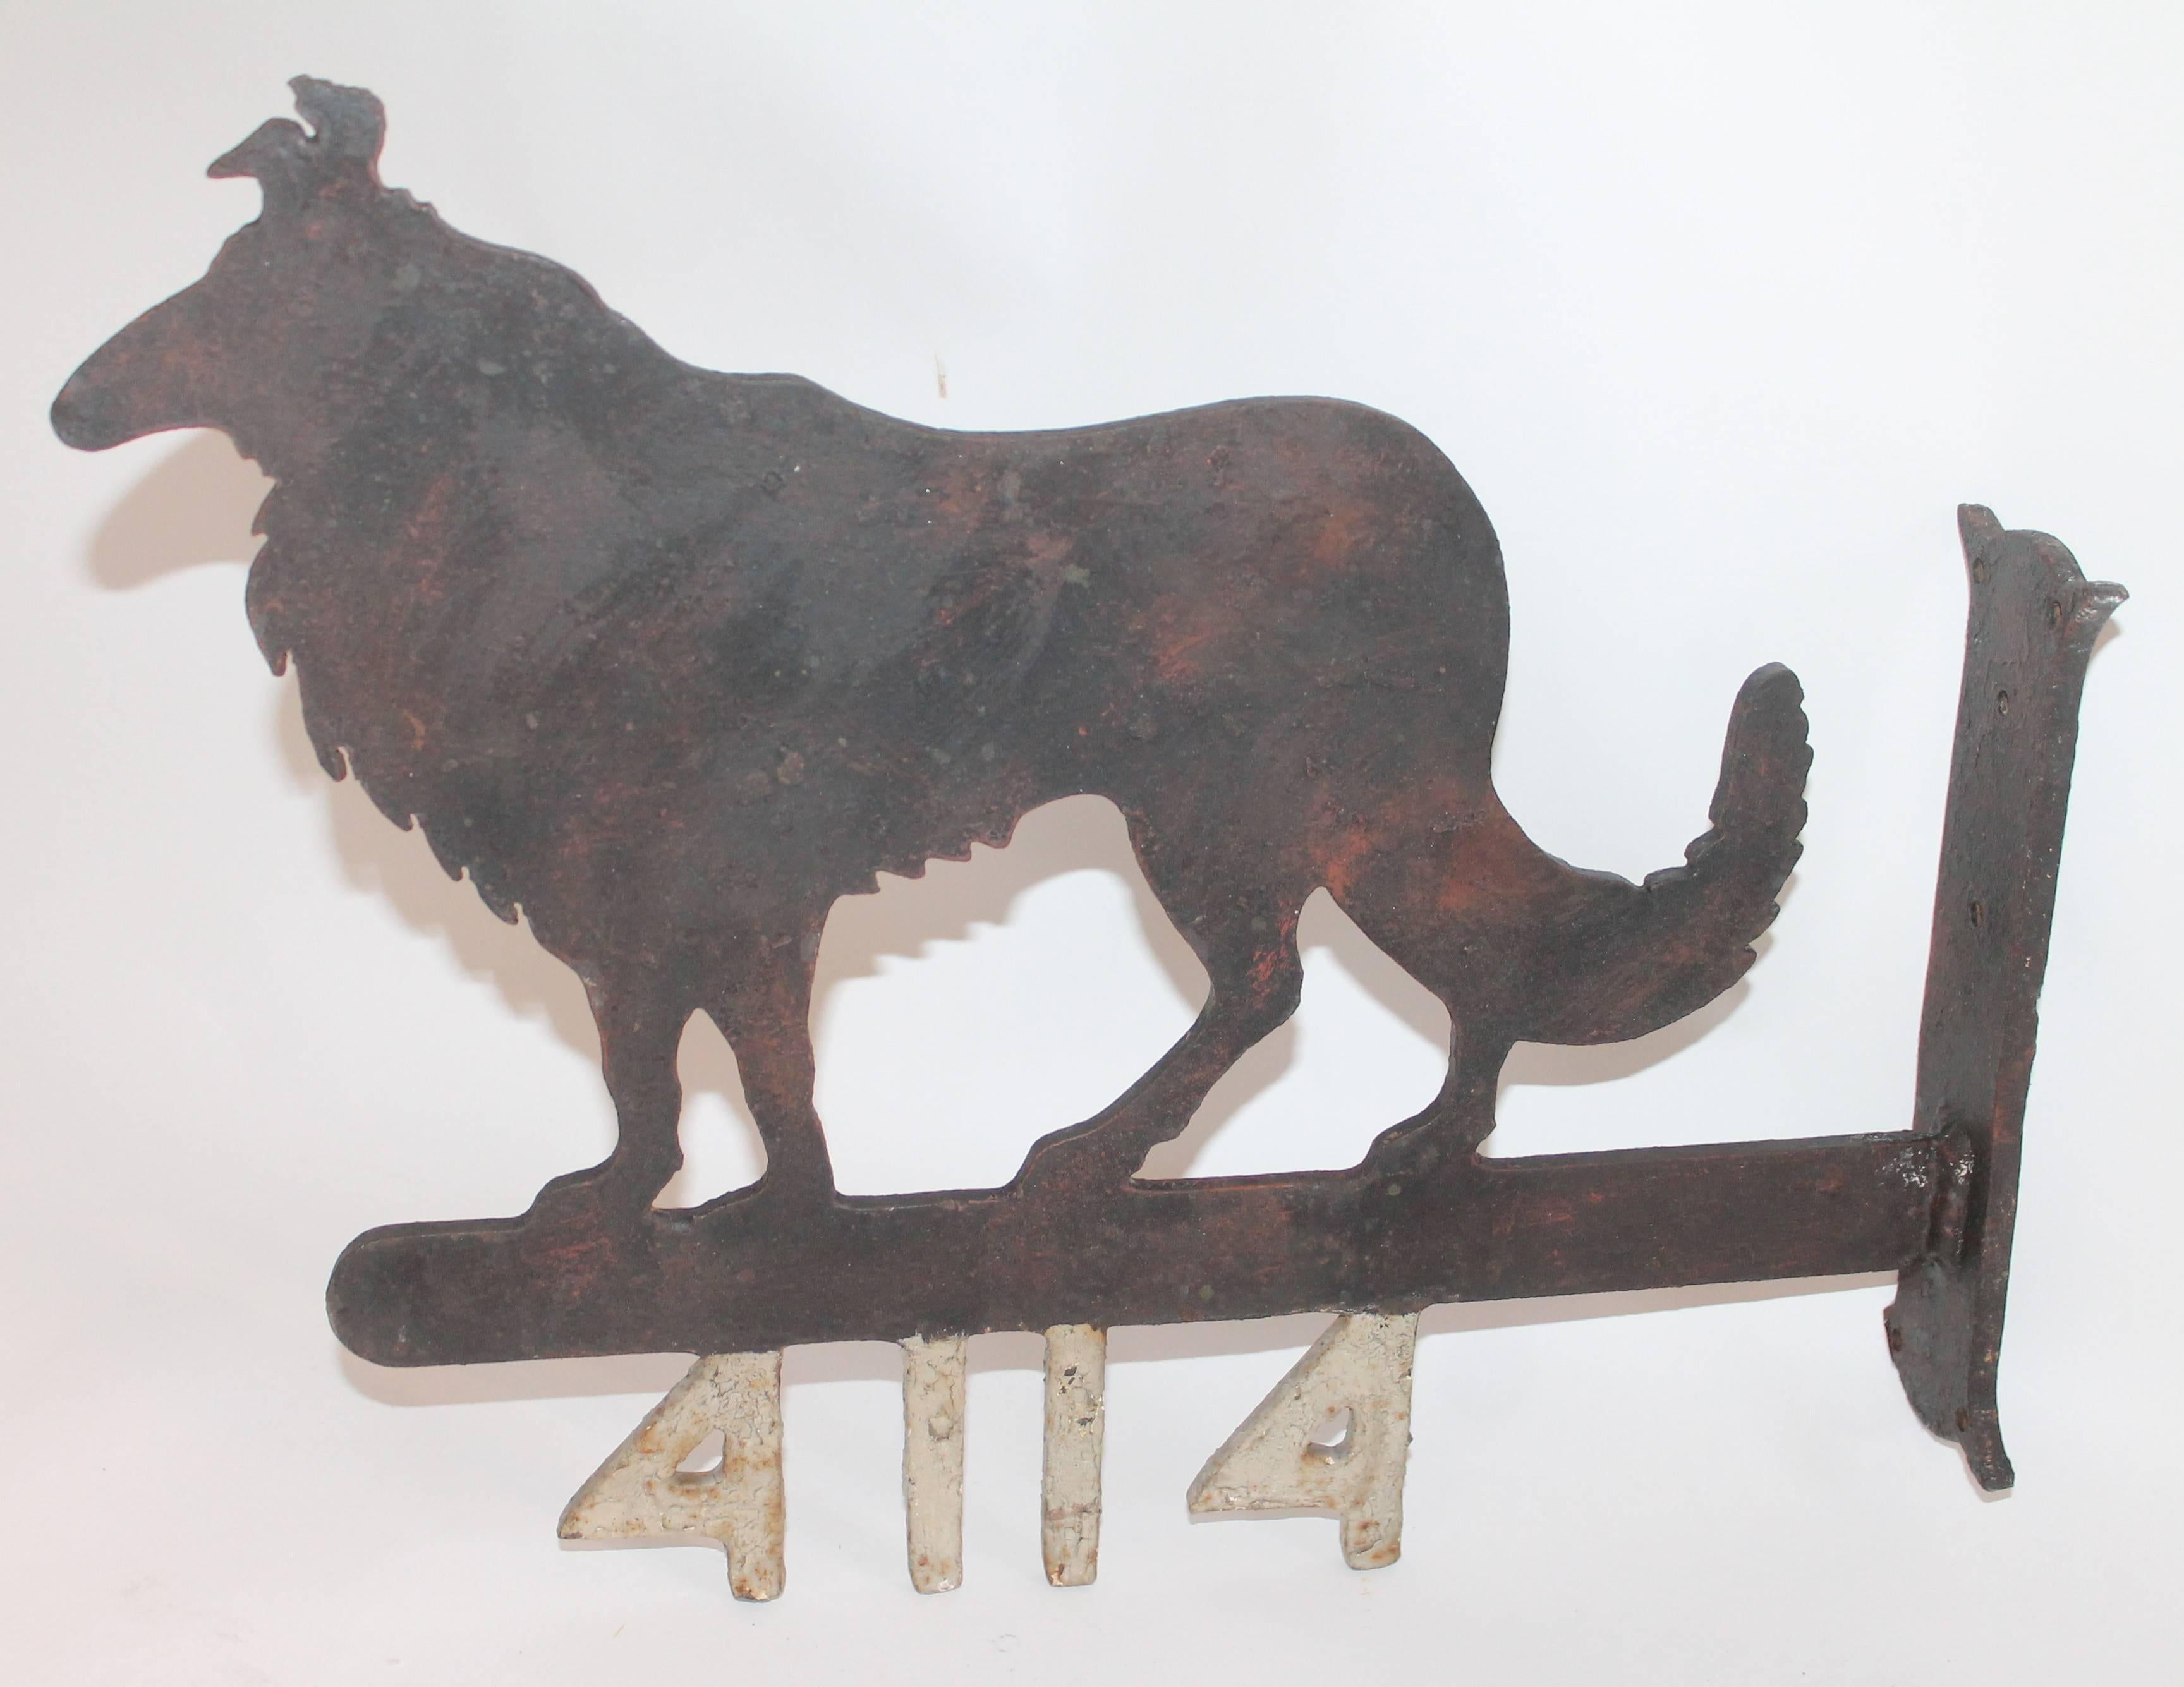 This numbered sign was from a farmhouse and they probably raised or bread dogs. The number 4114 was to designate the property address. This is a double sided trade sign of sorts. The painted surface is original as found. The condition is very good.